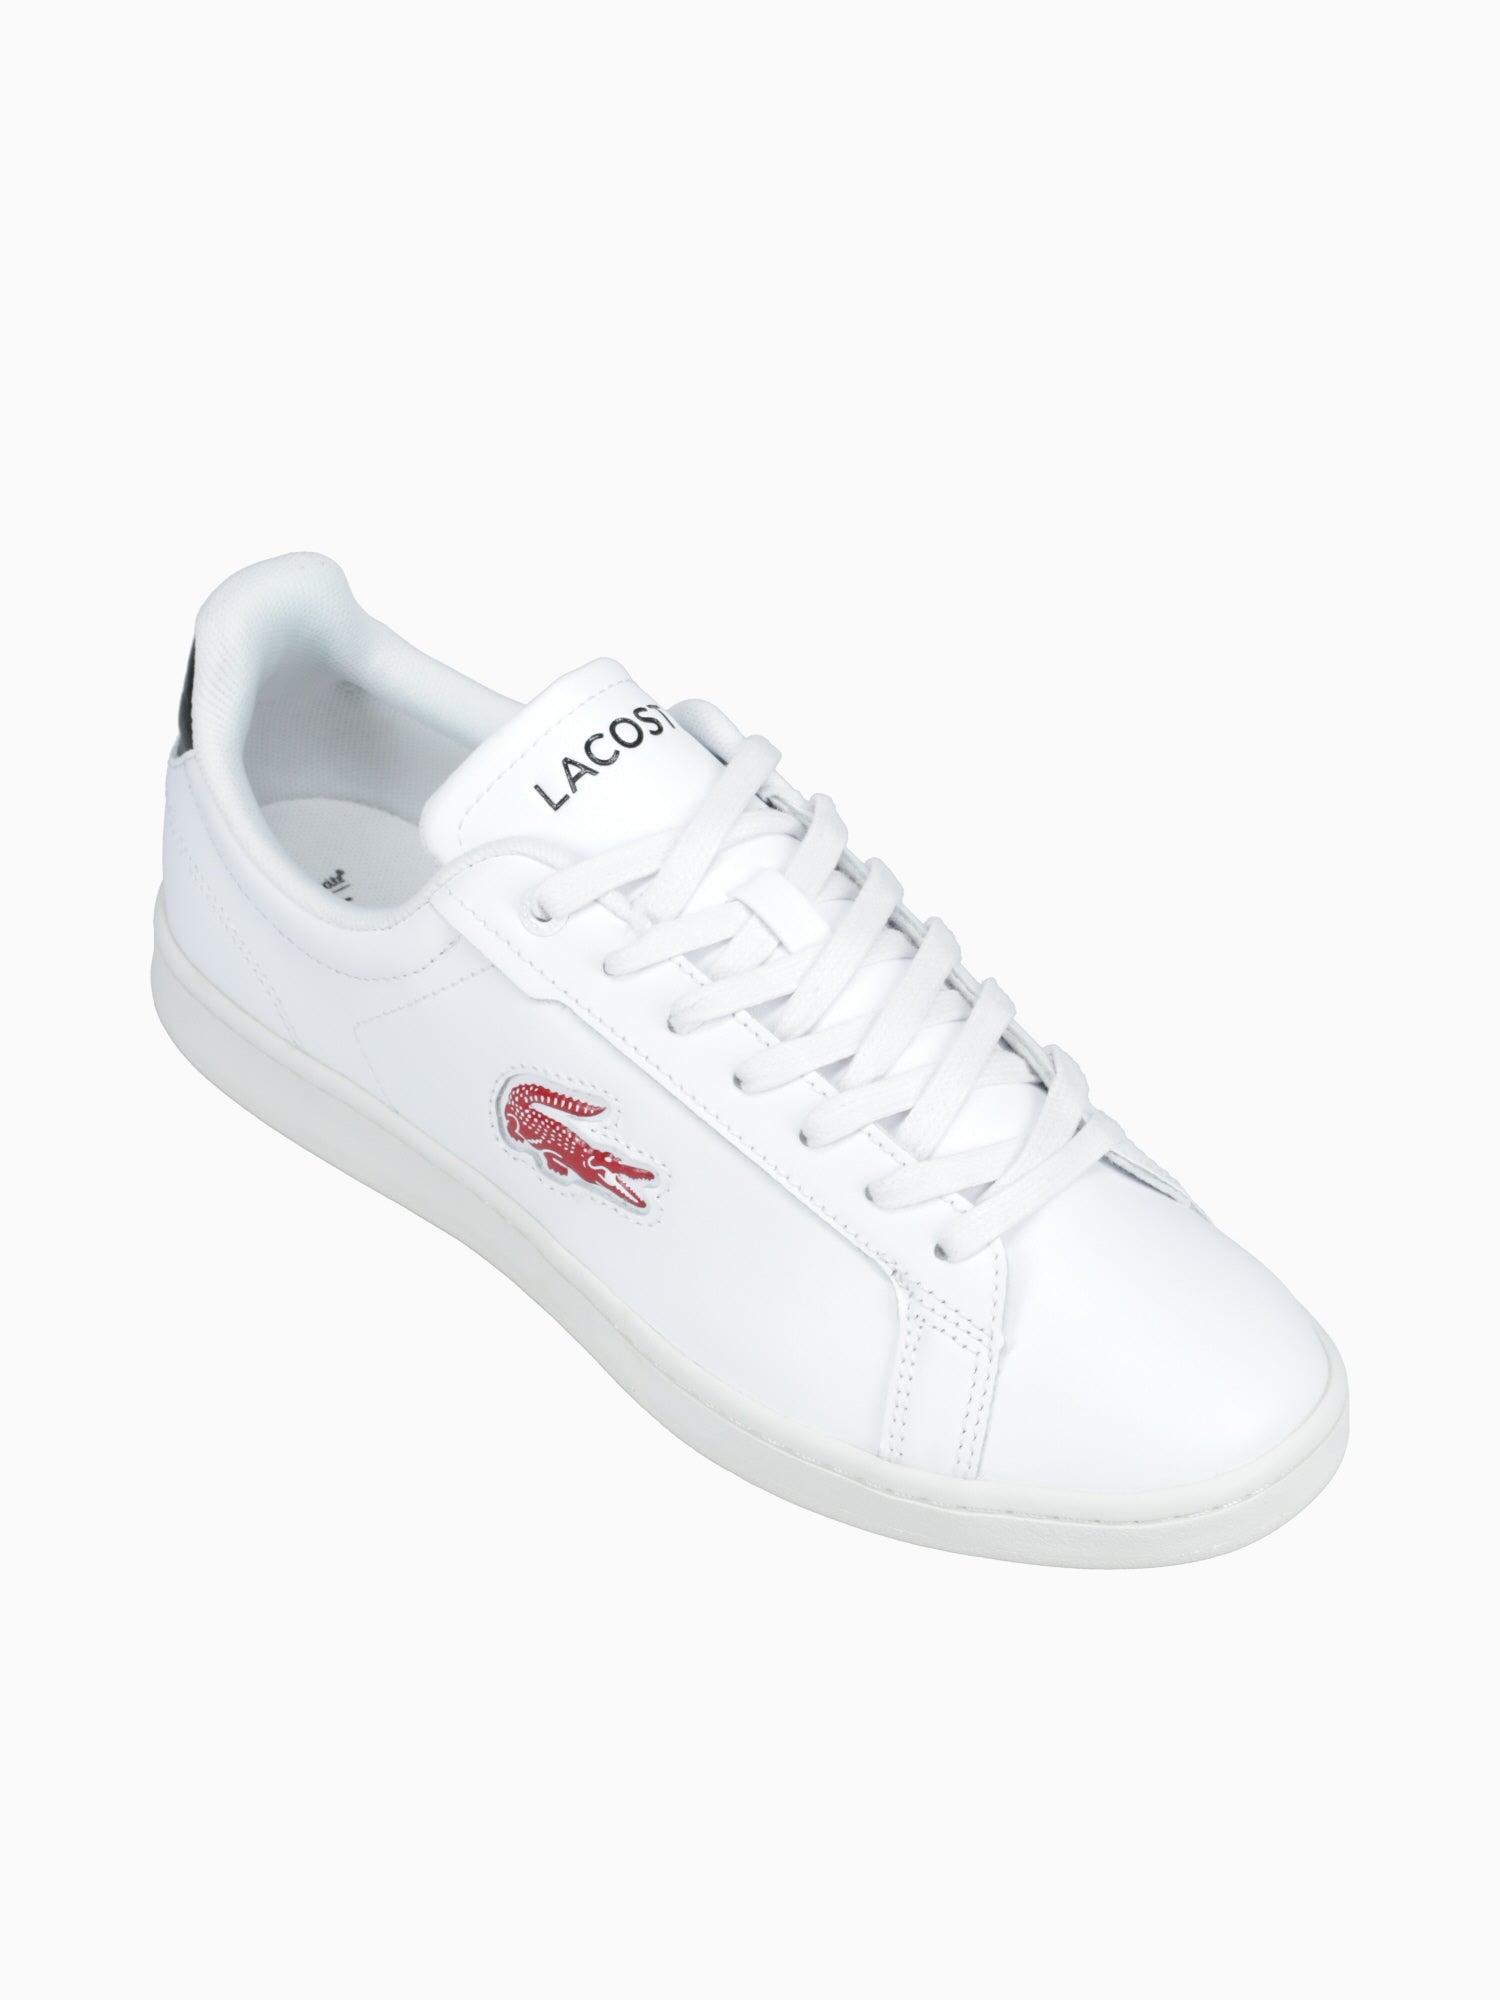 Carnaby Pro 124 White Black leather White Multi / 7 / M